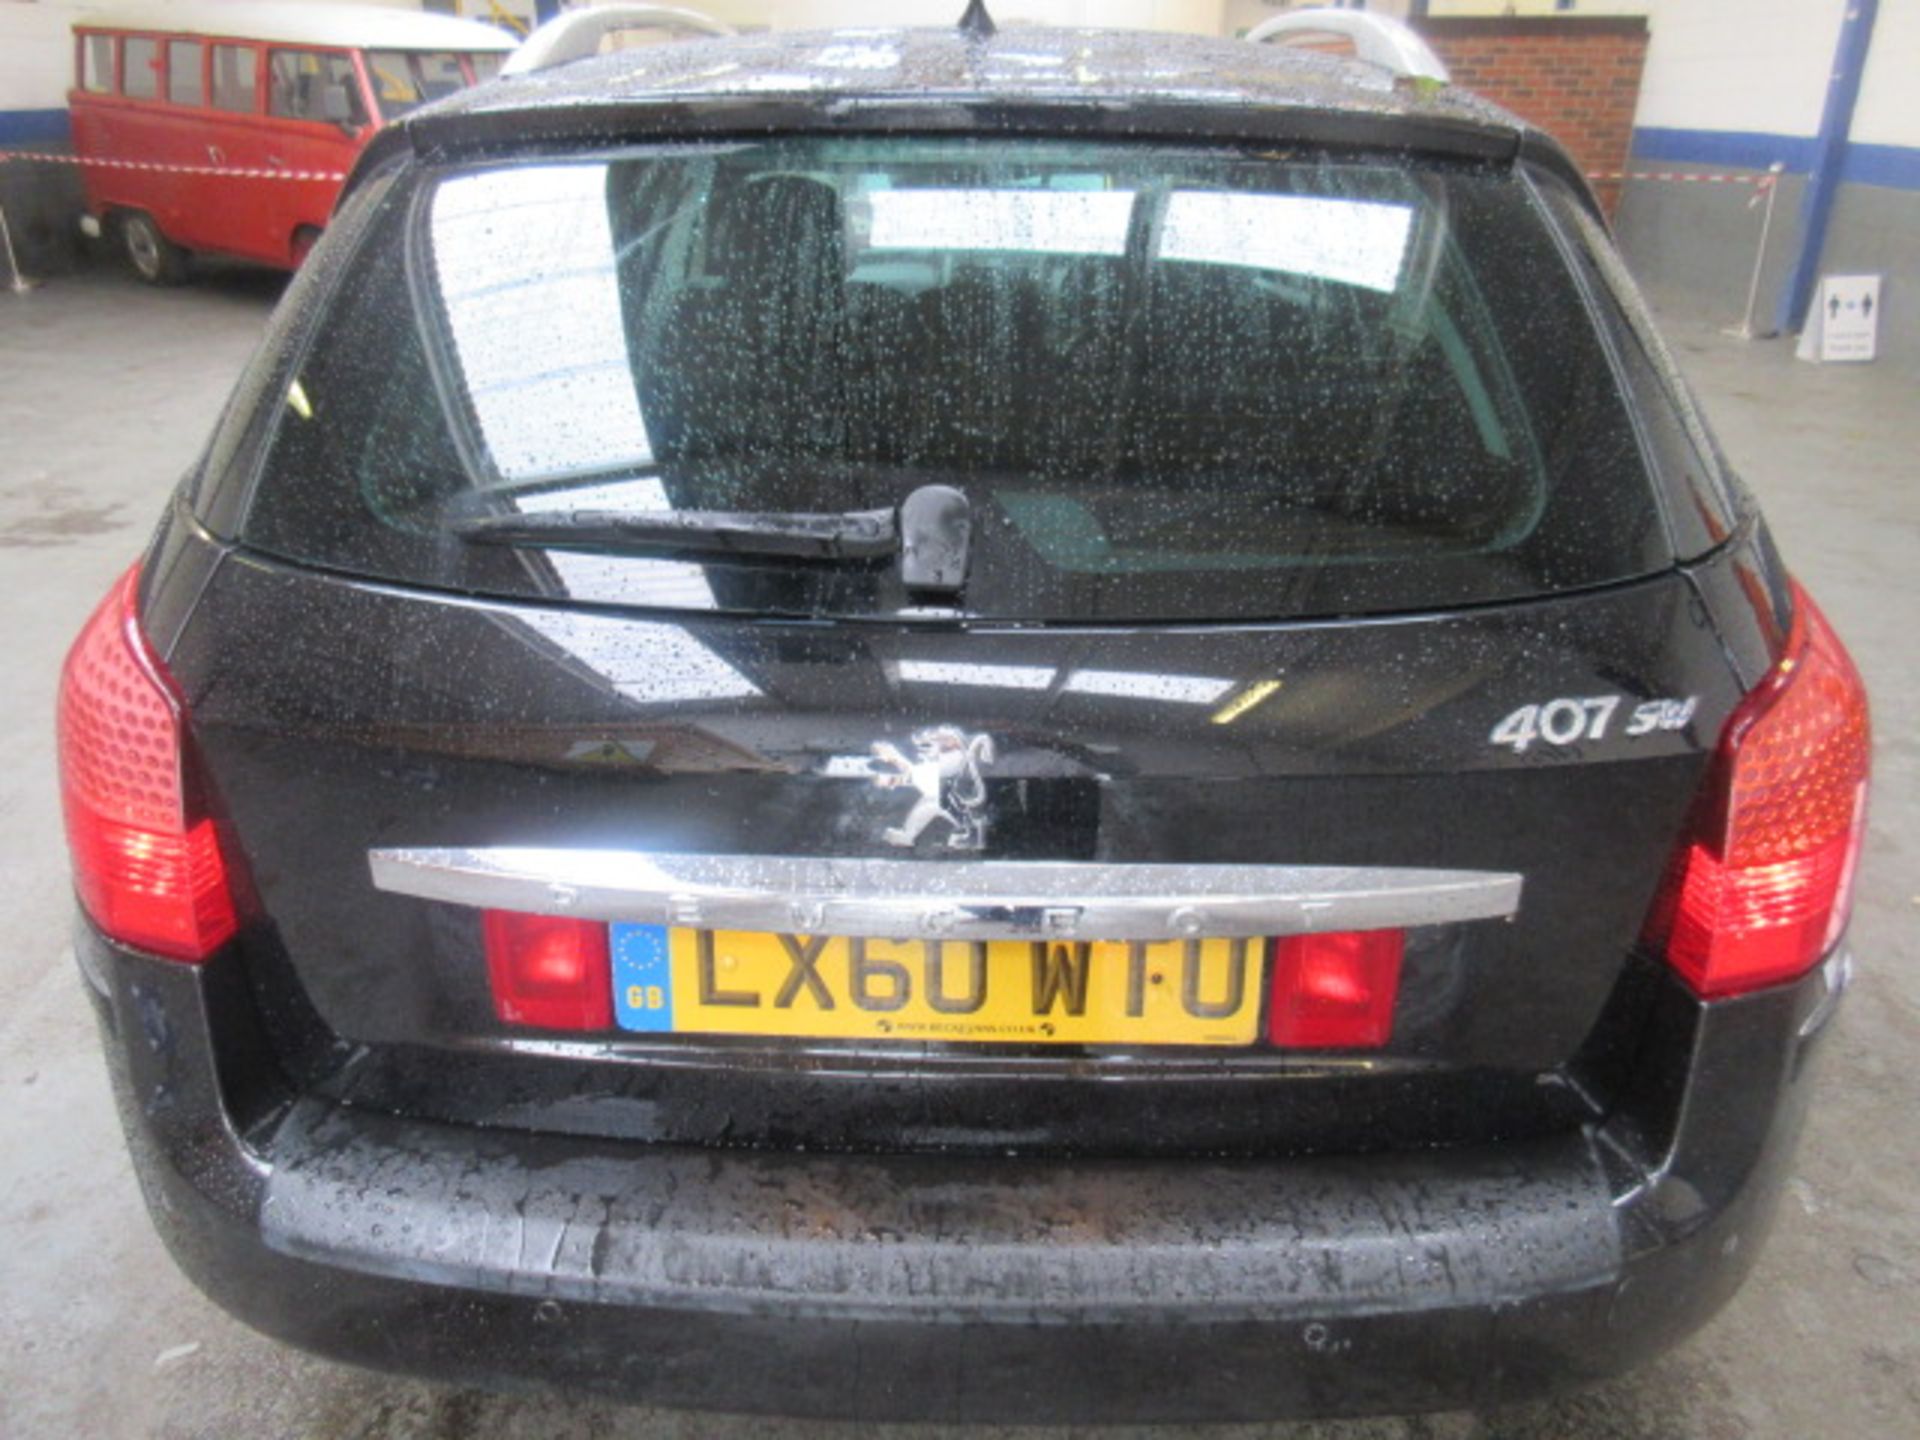 2010 Peugeot 407 Sport SW HDI 163 - Image 4 of 11